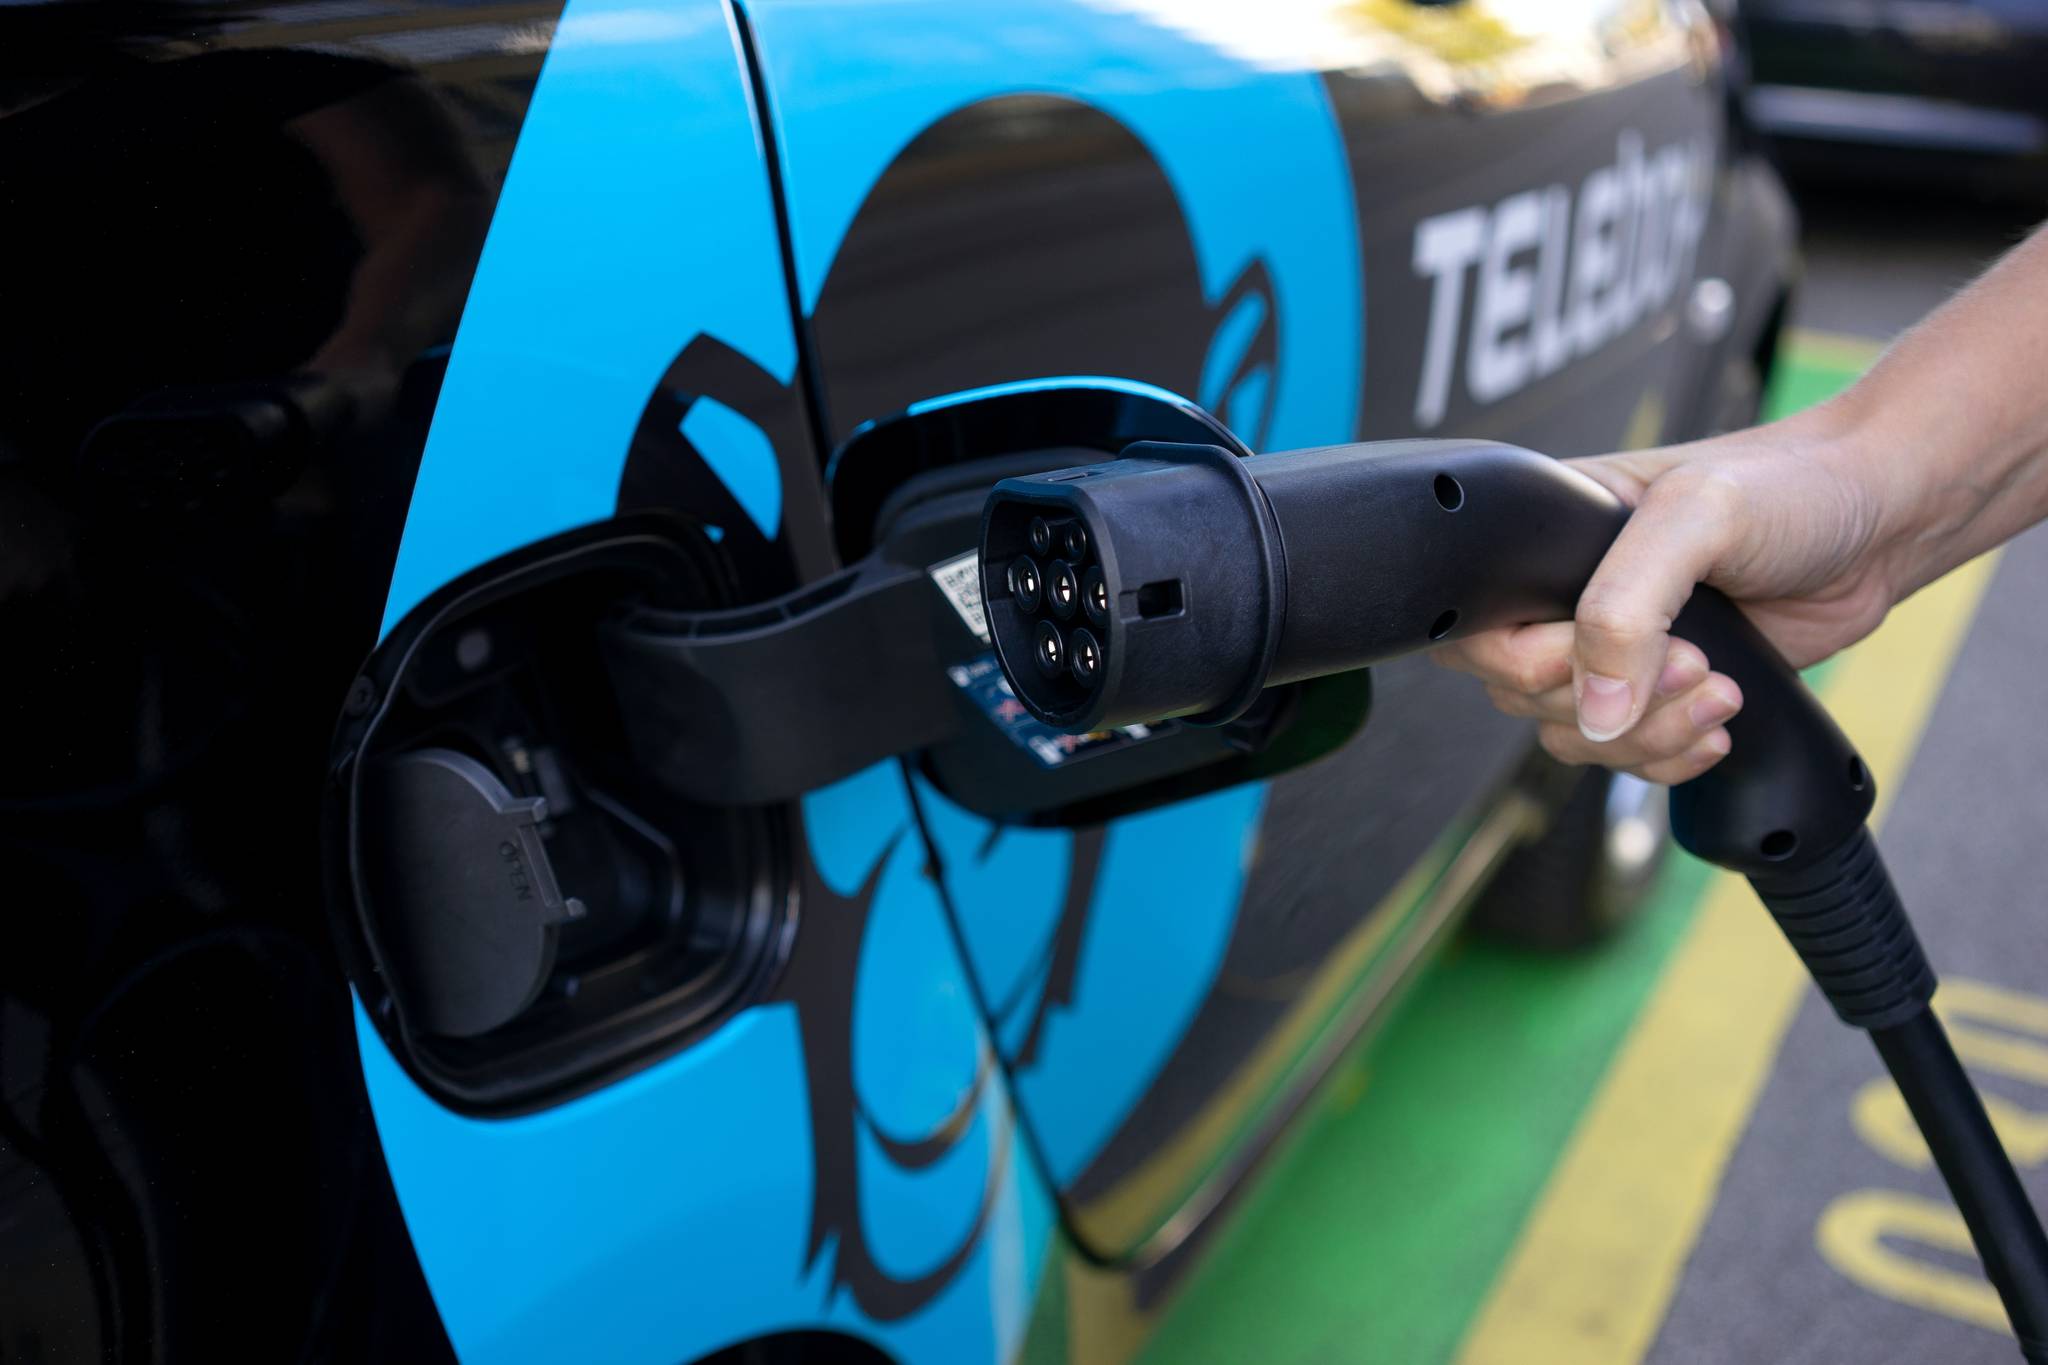 ChargeScape attempts to improve charging for EV drivers